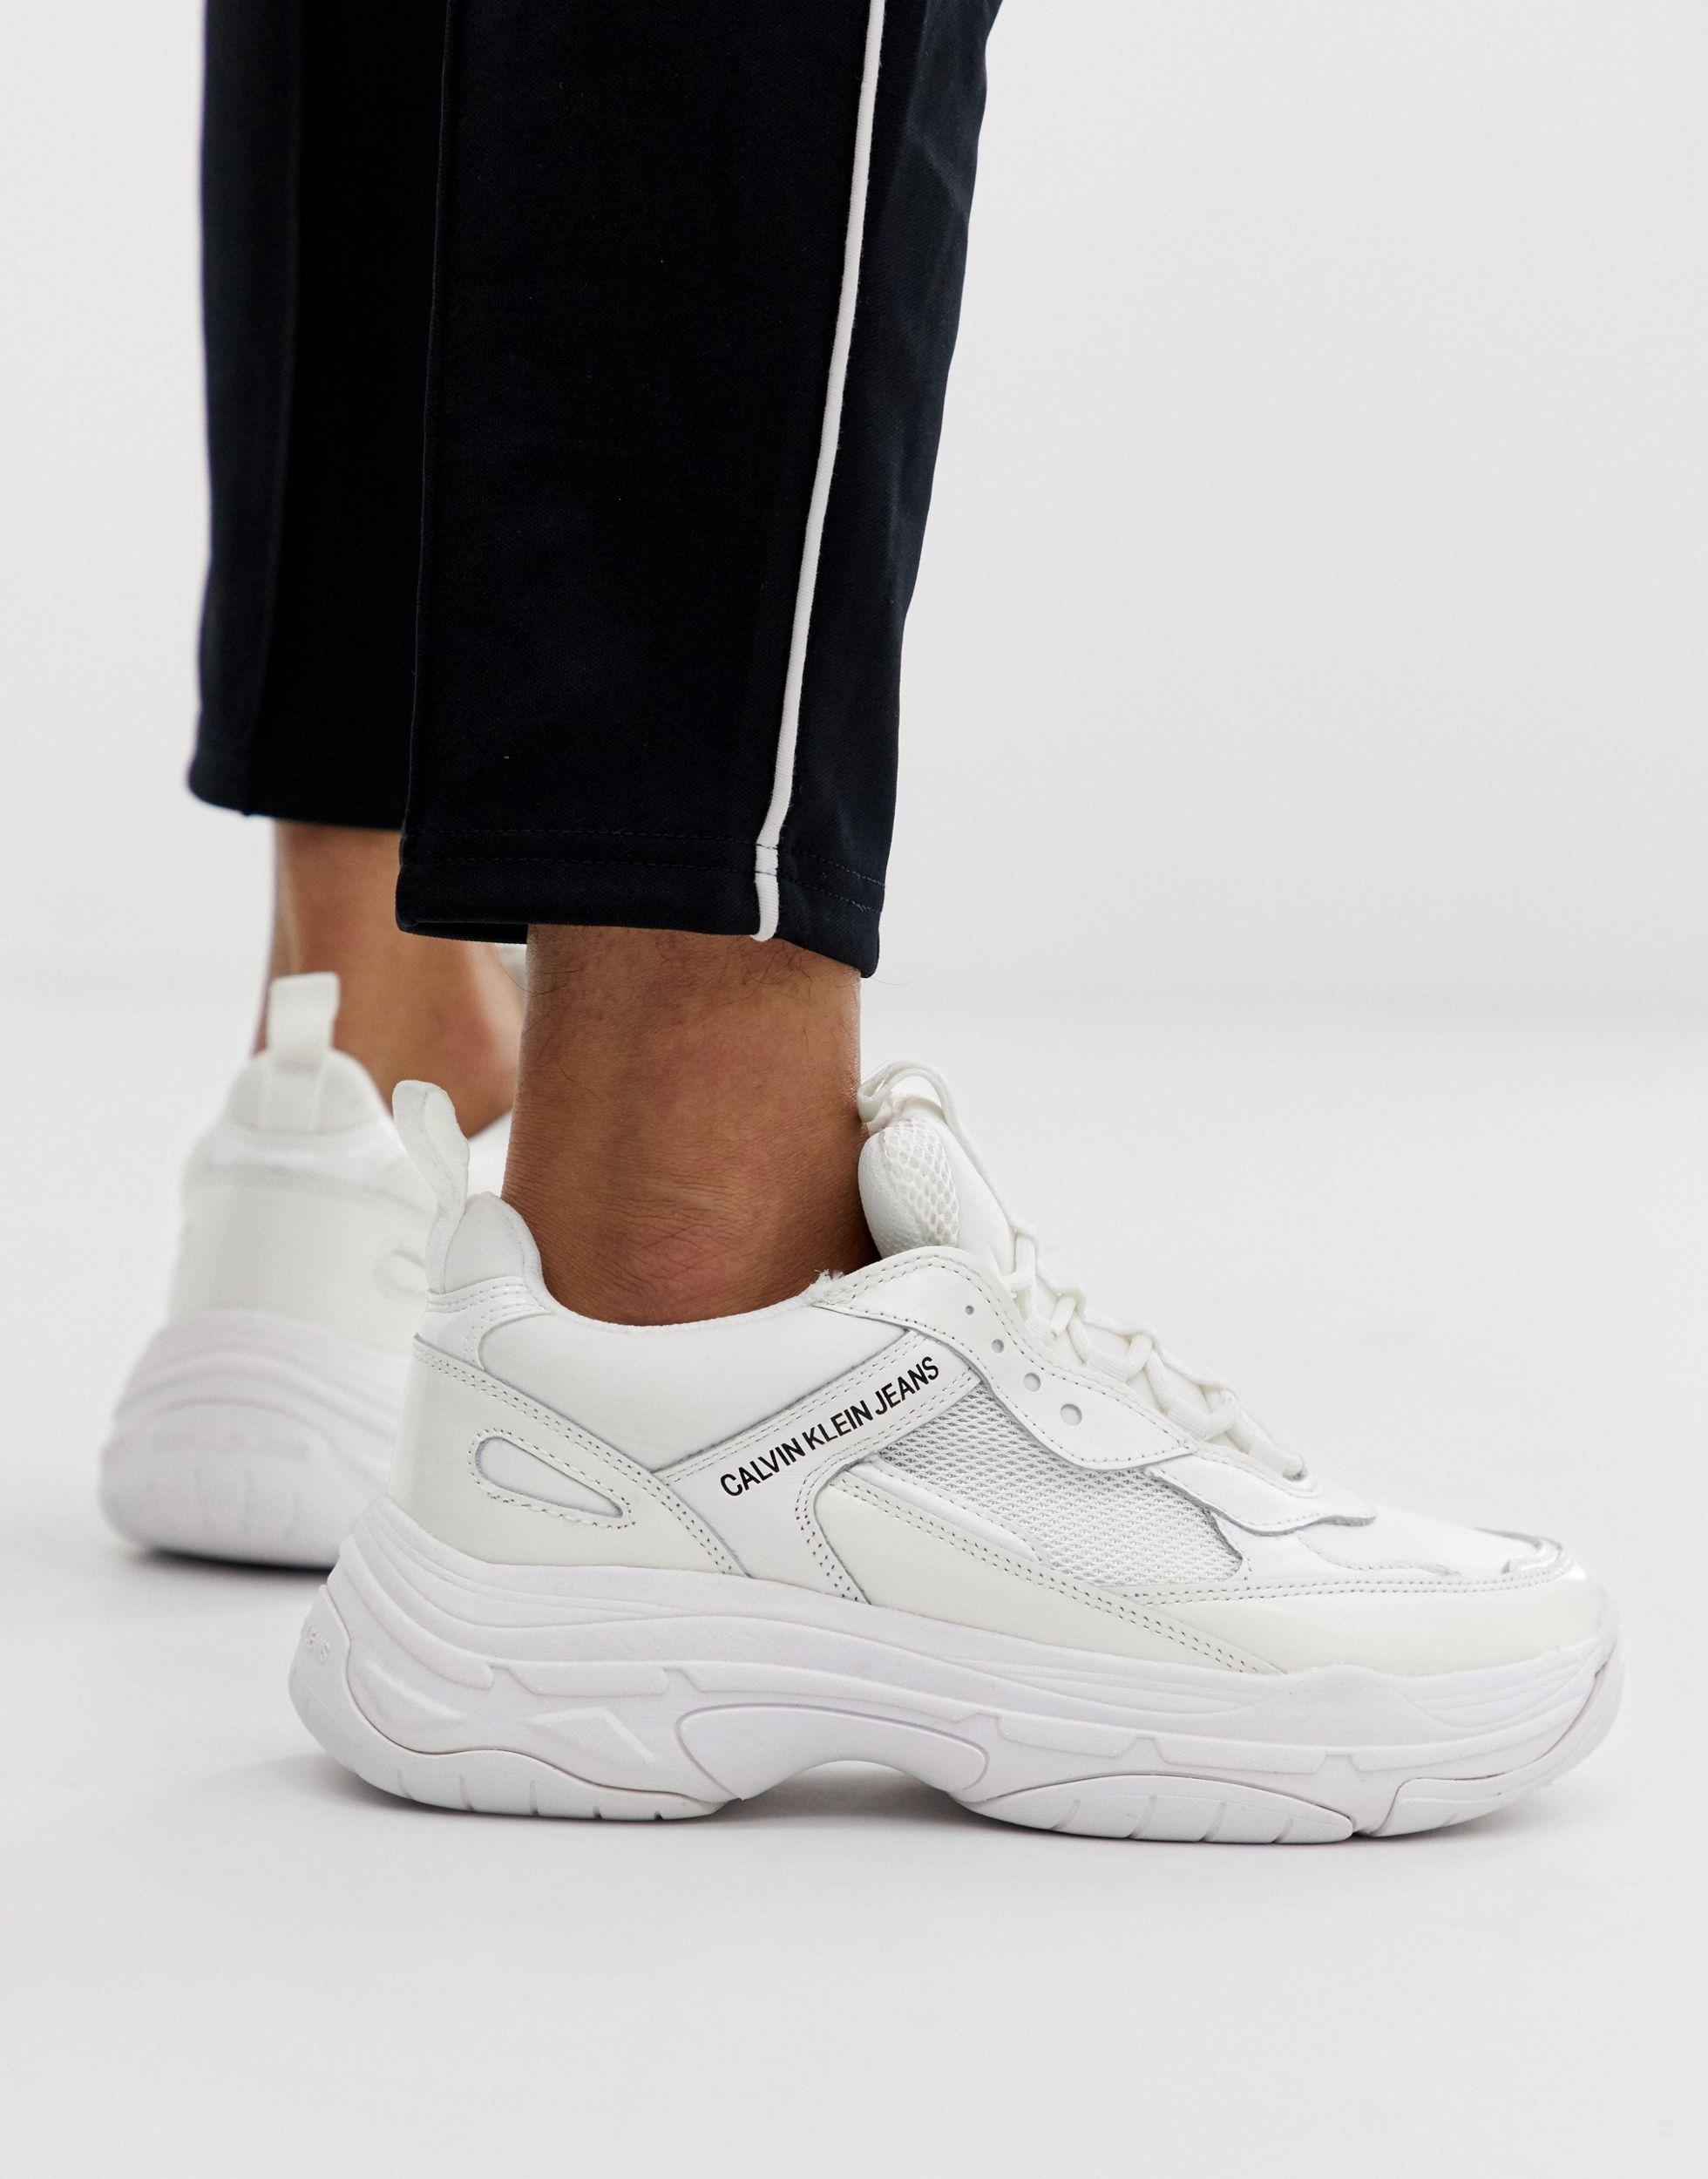 Calvin Klein Marvin Mesh Trainers United Kingdom, SAVE 59% - aveclumiere.com